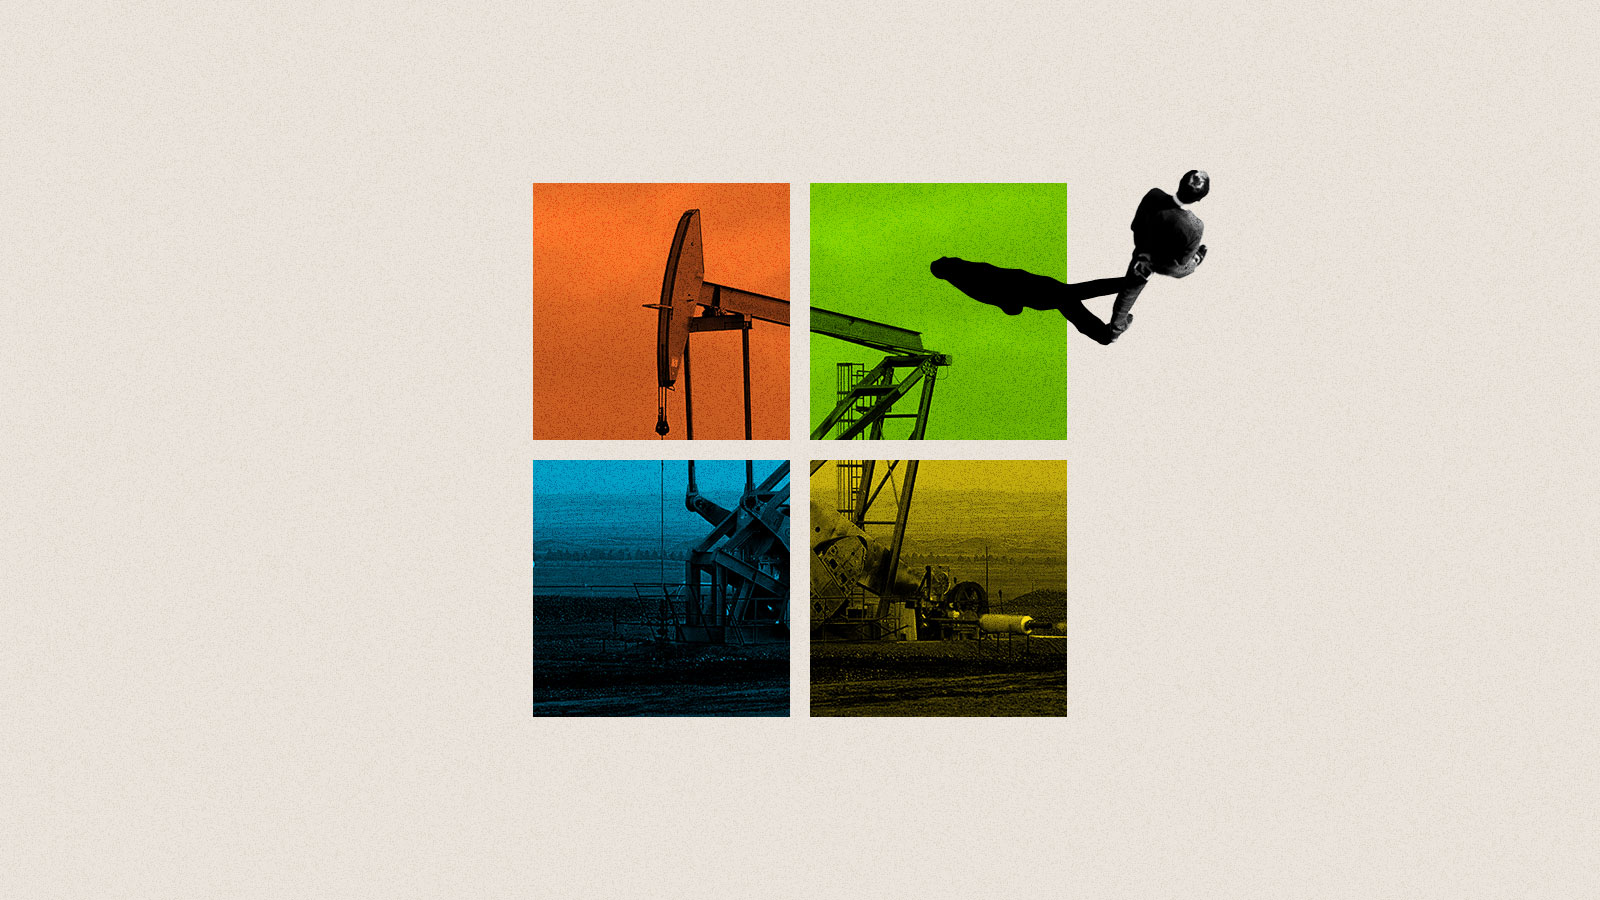 Microsoft employees spent years fighting the tech giant’s oil ties. Now, they’re speaking out.